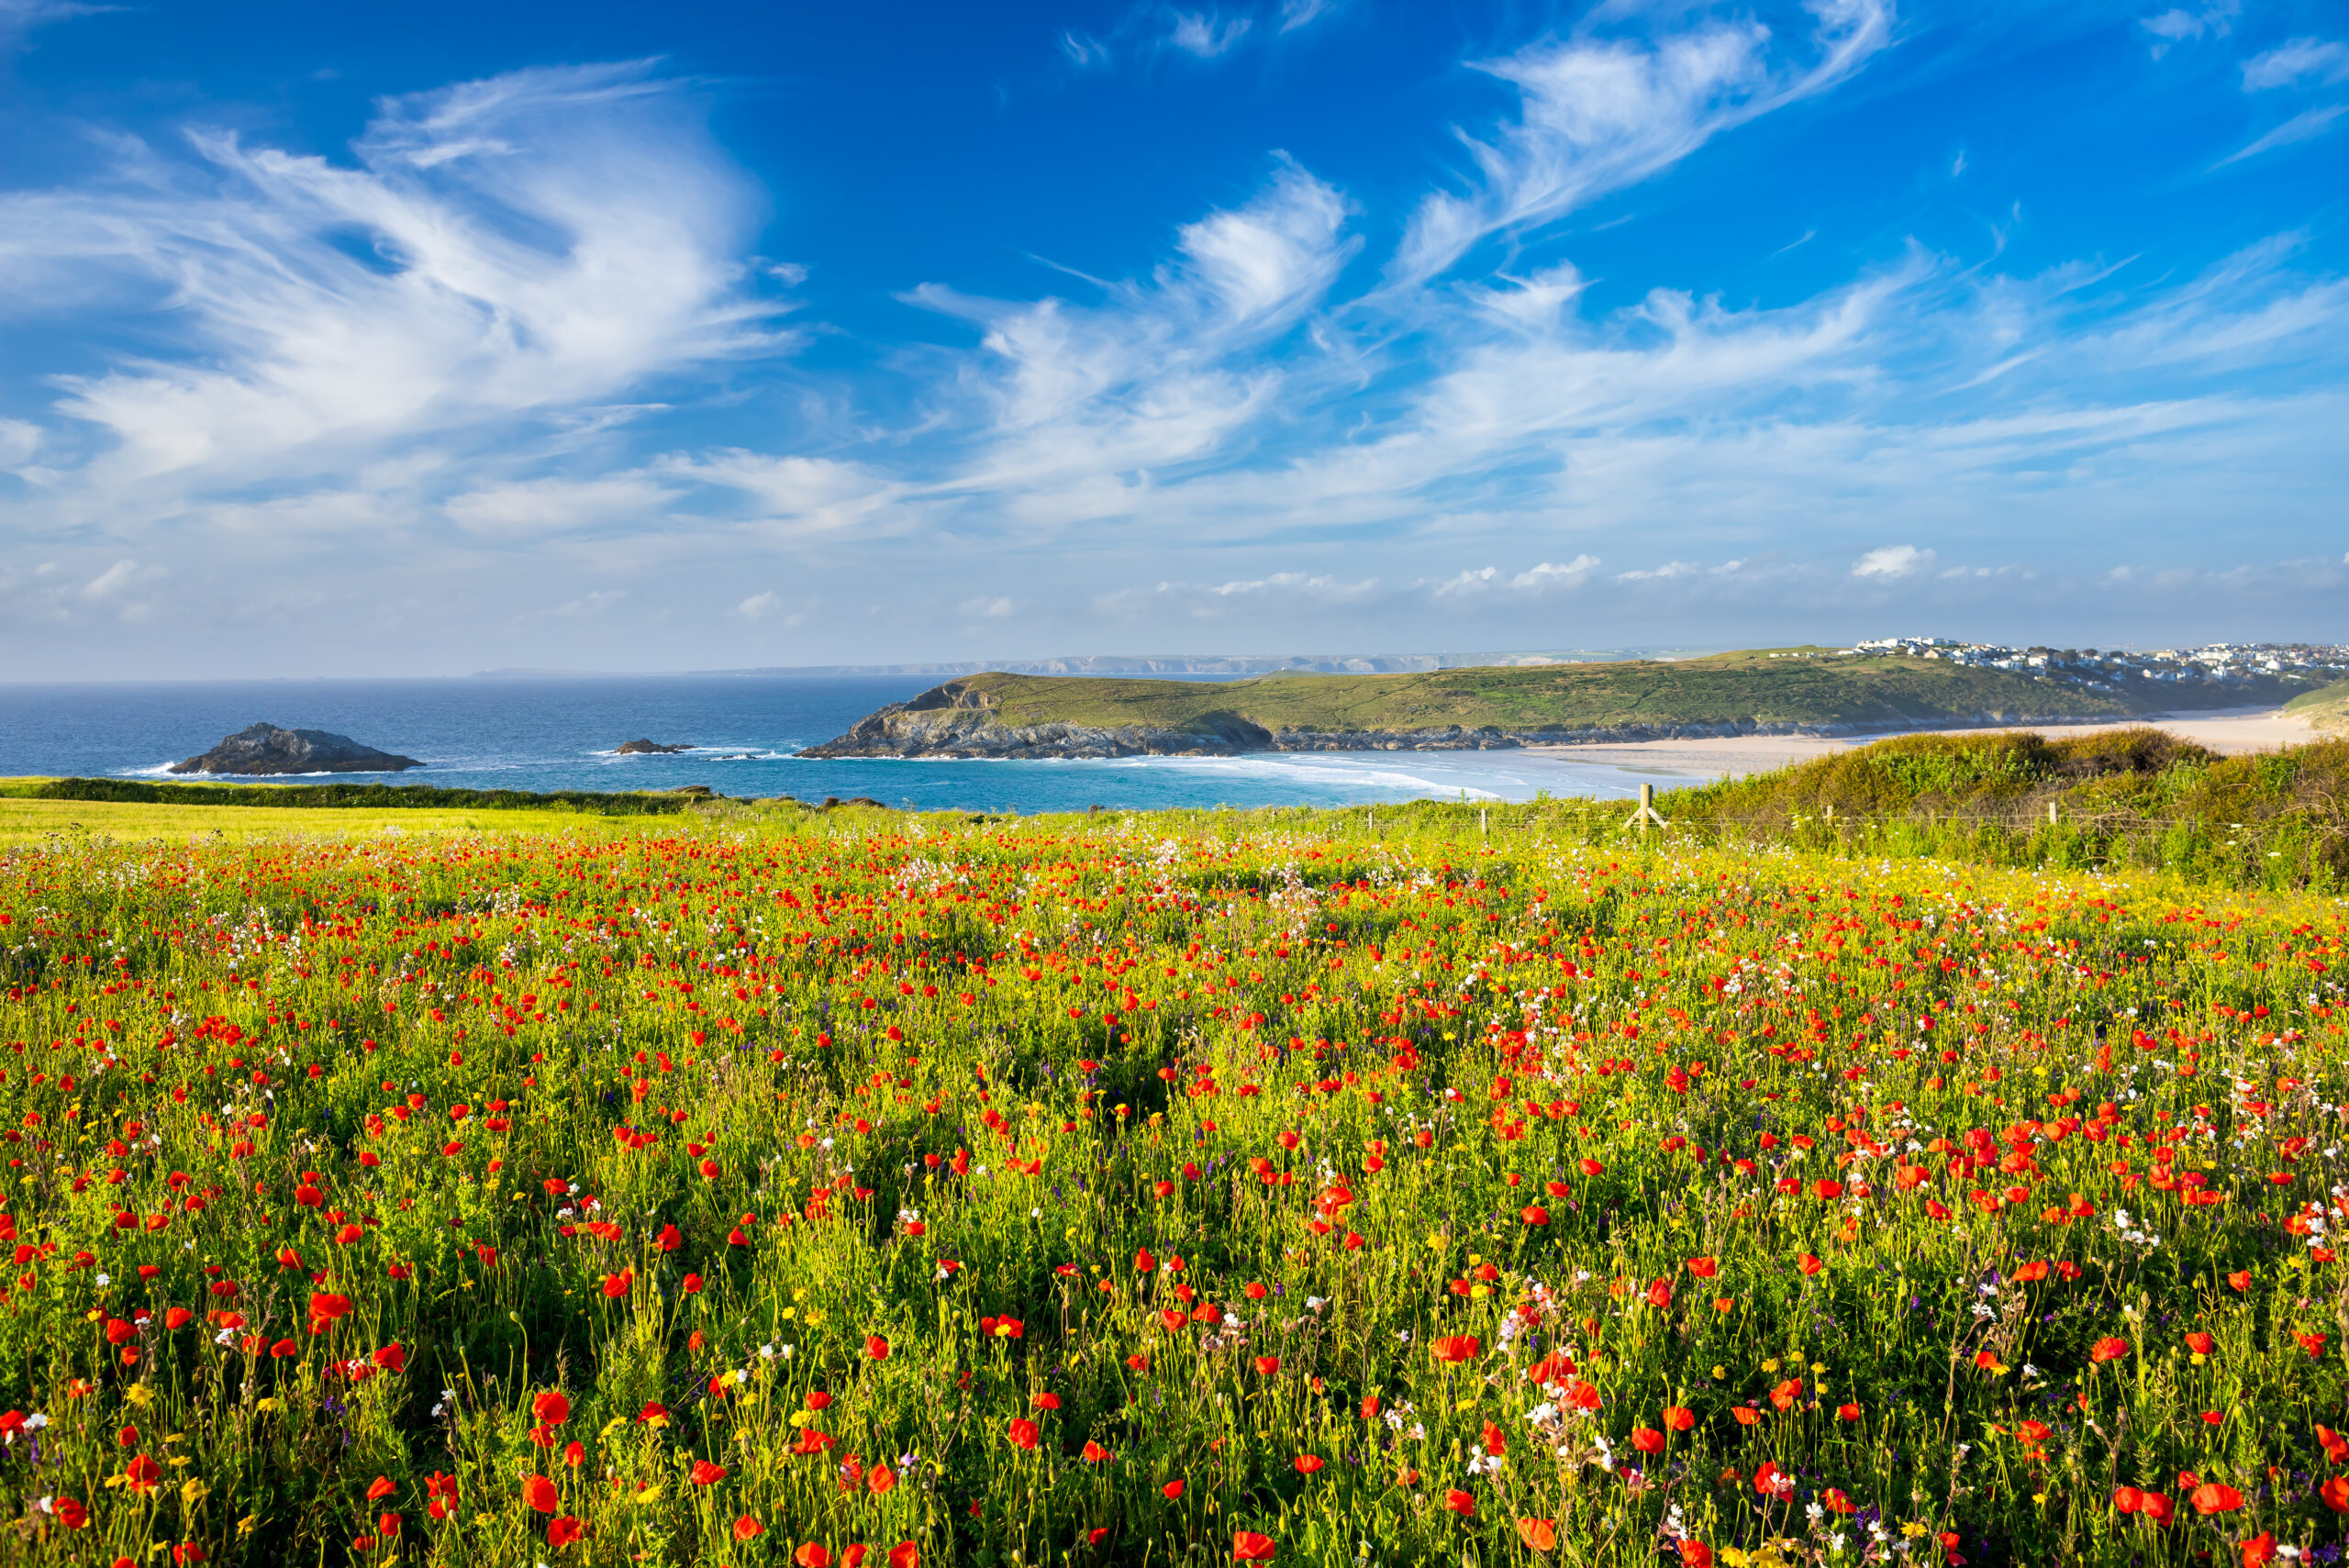 Field of Poppies and wild flowers overlooking Crantock Beach near Newquay Cornwall England UK Europe.